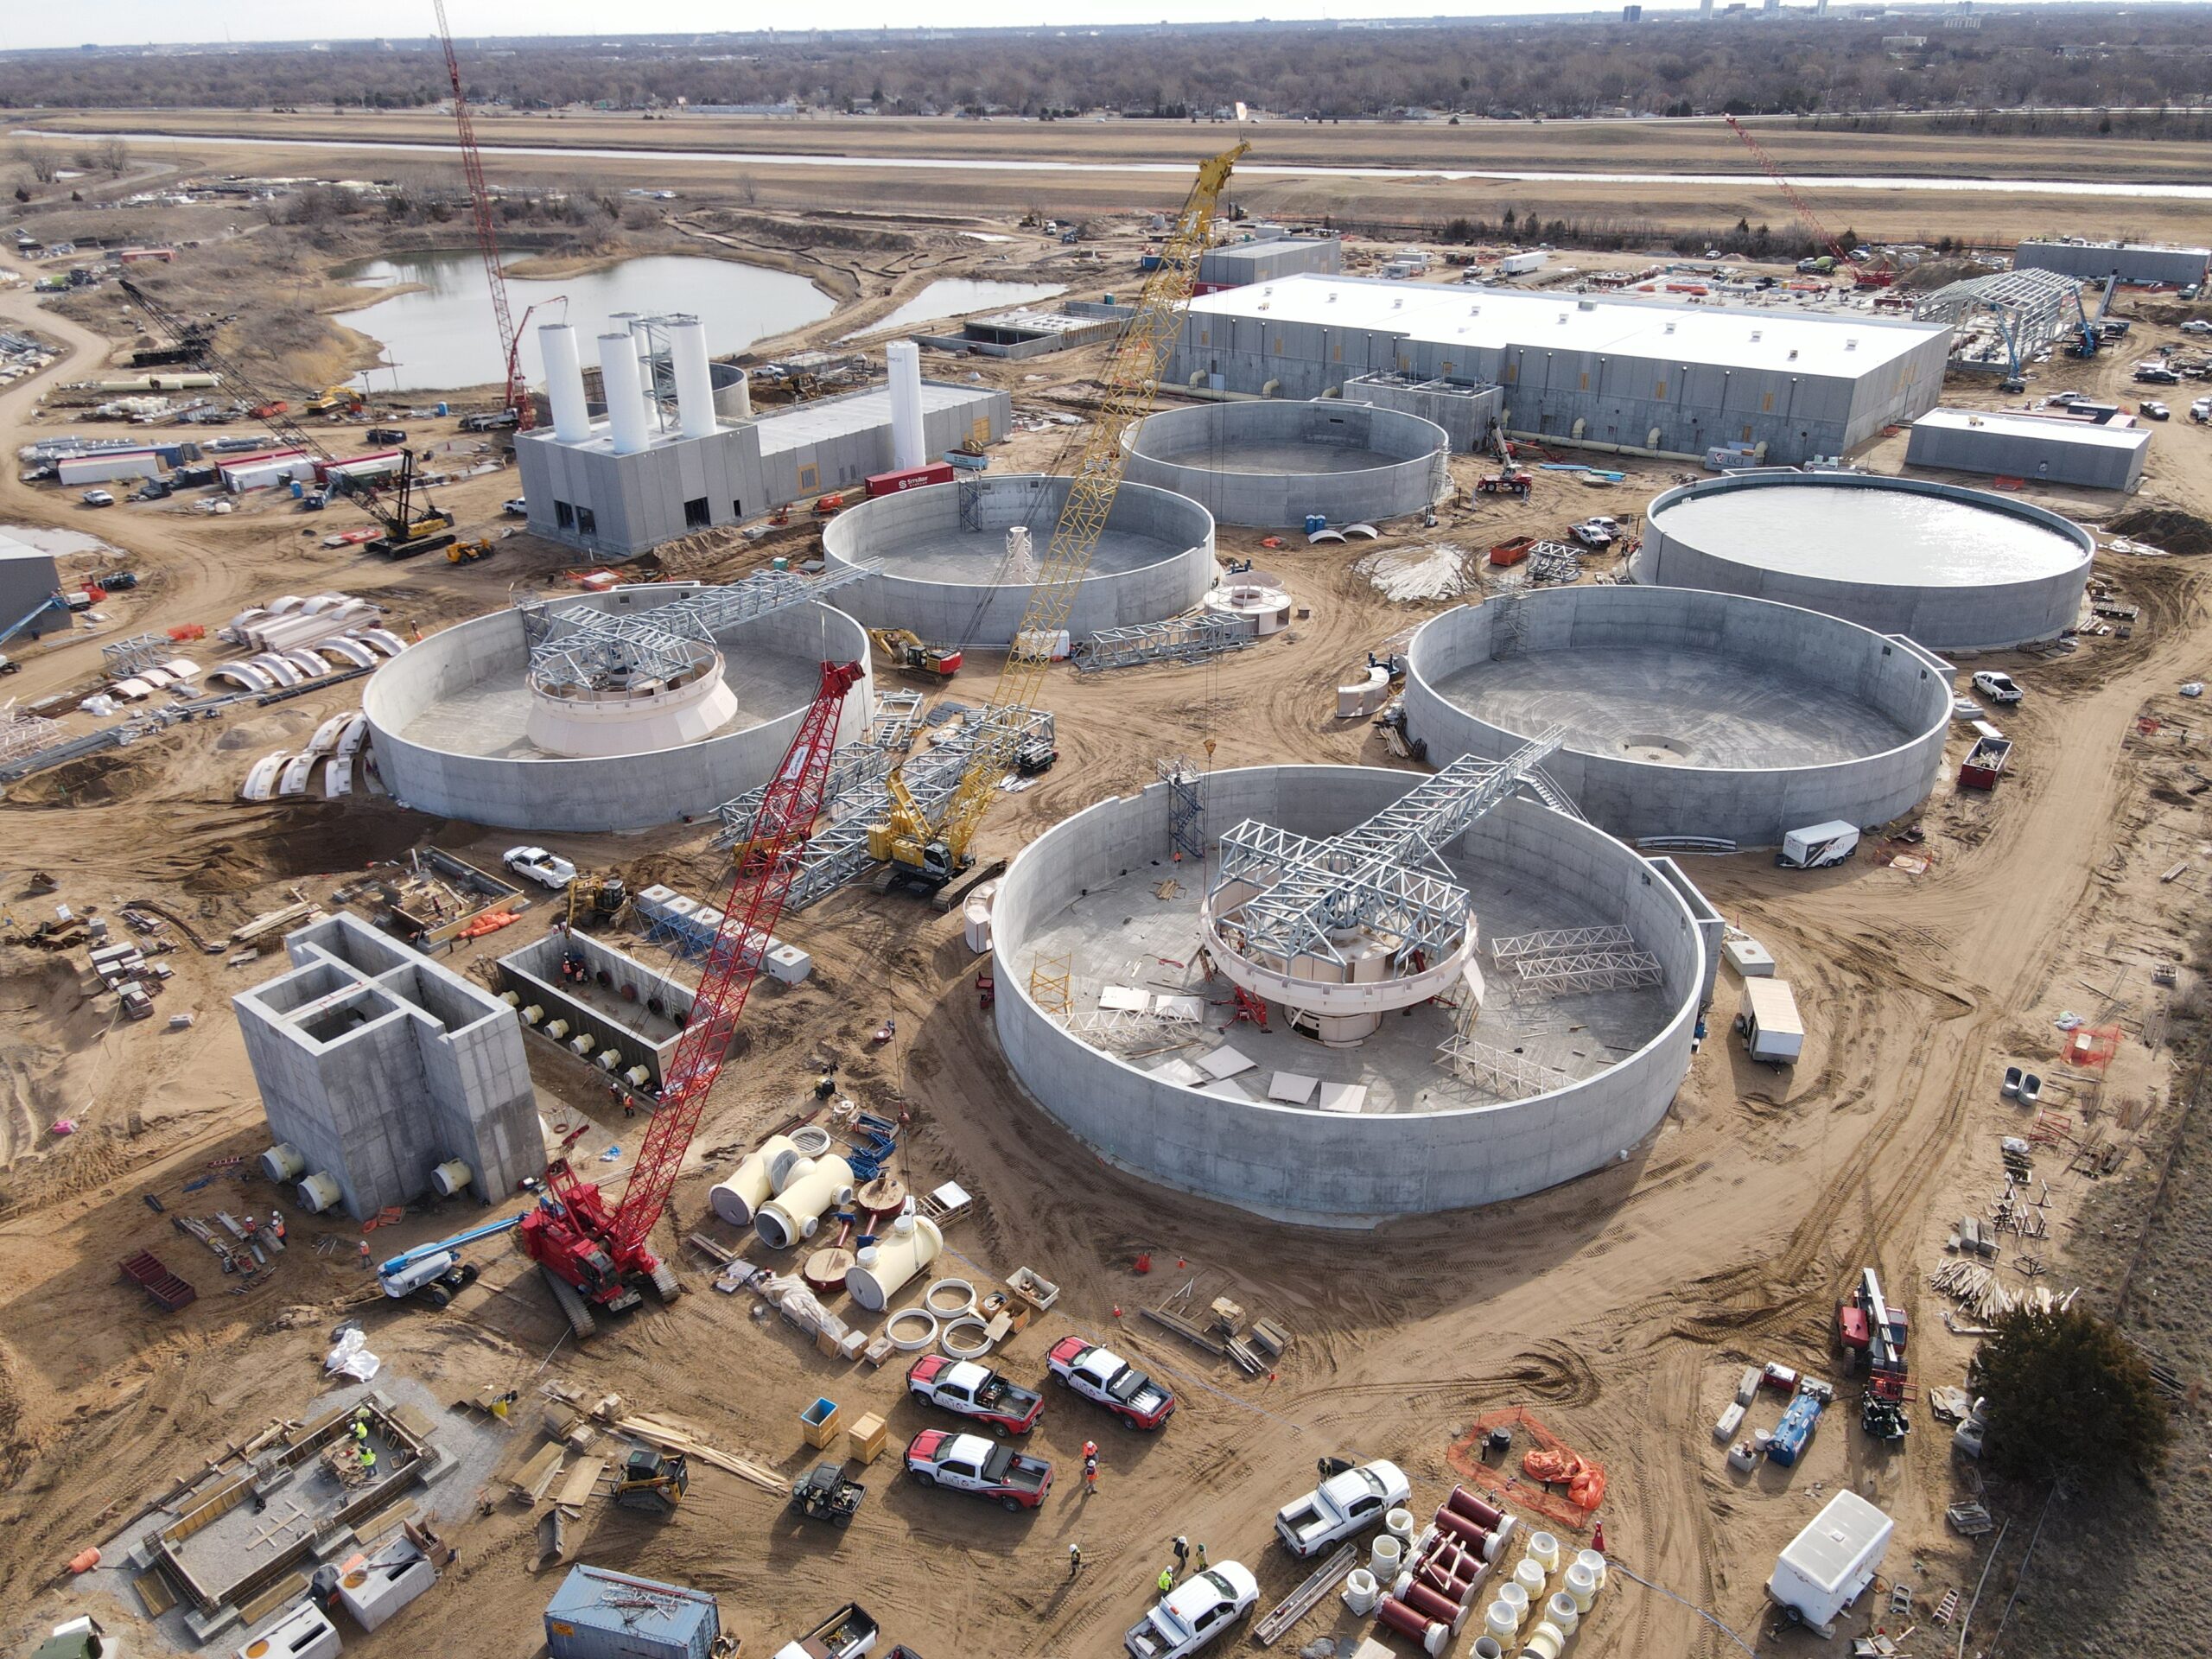 Aerial photo showing the construction site at Wichita's Northwest Water Facility